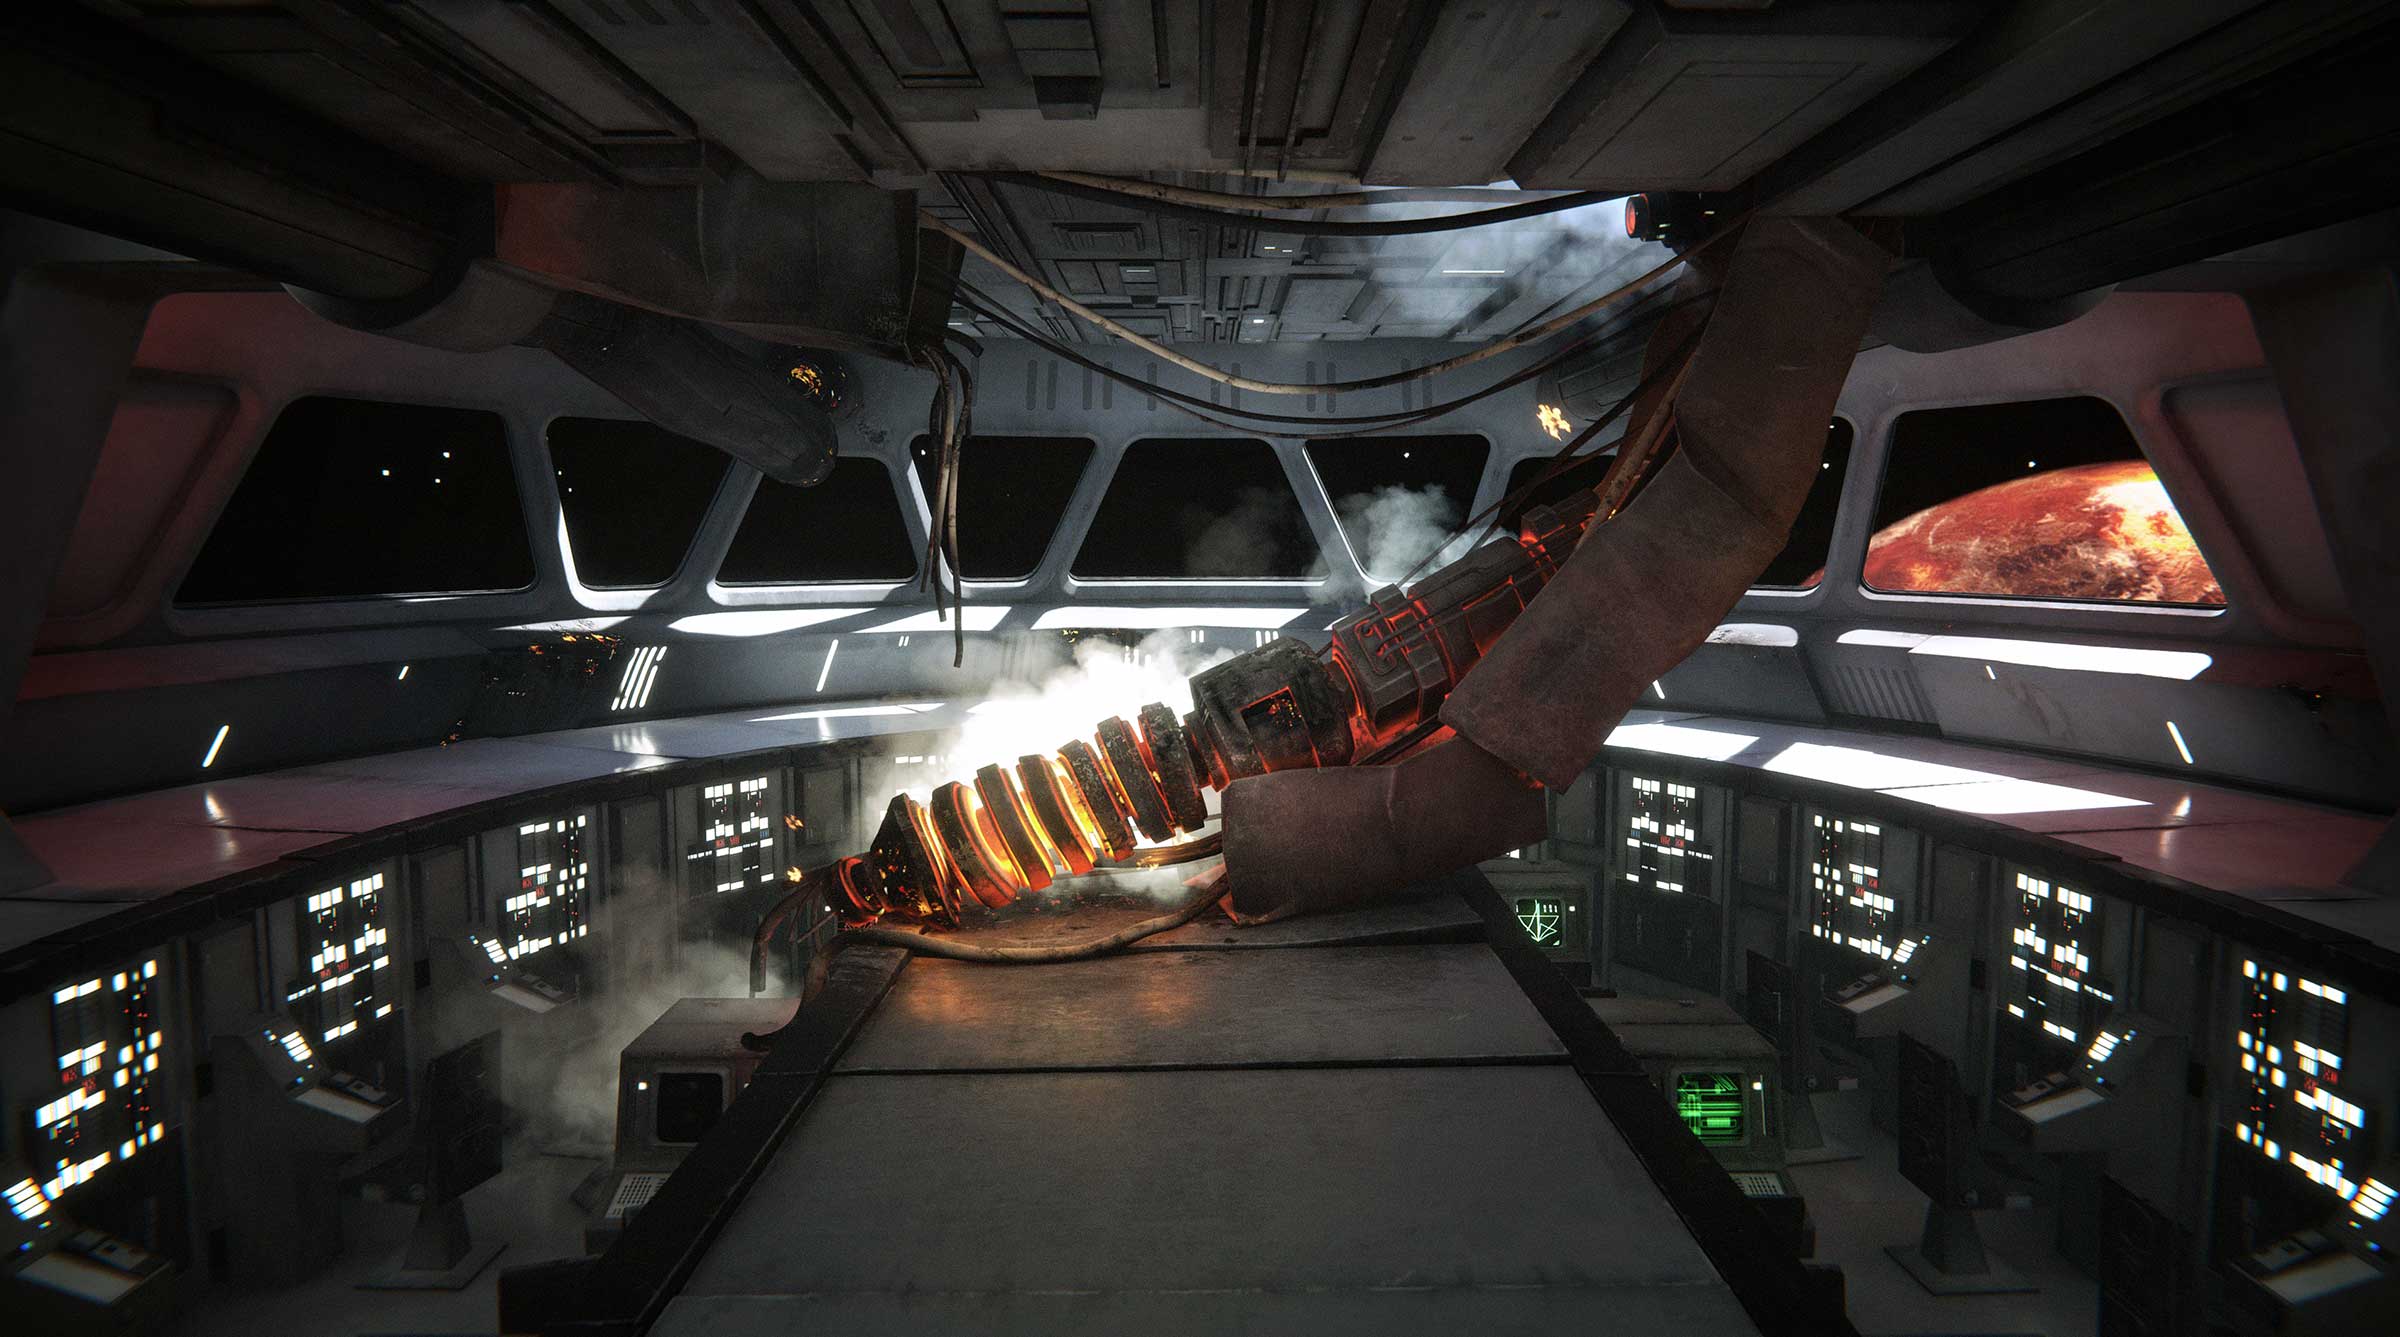 The interior of a spaceship where a heated rod has broken through the ceiling.